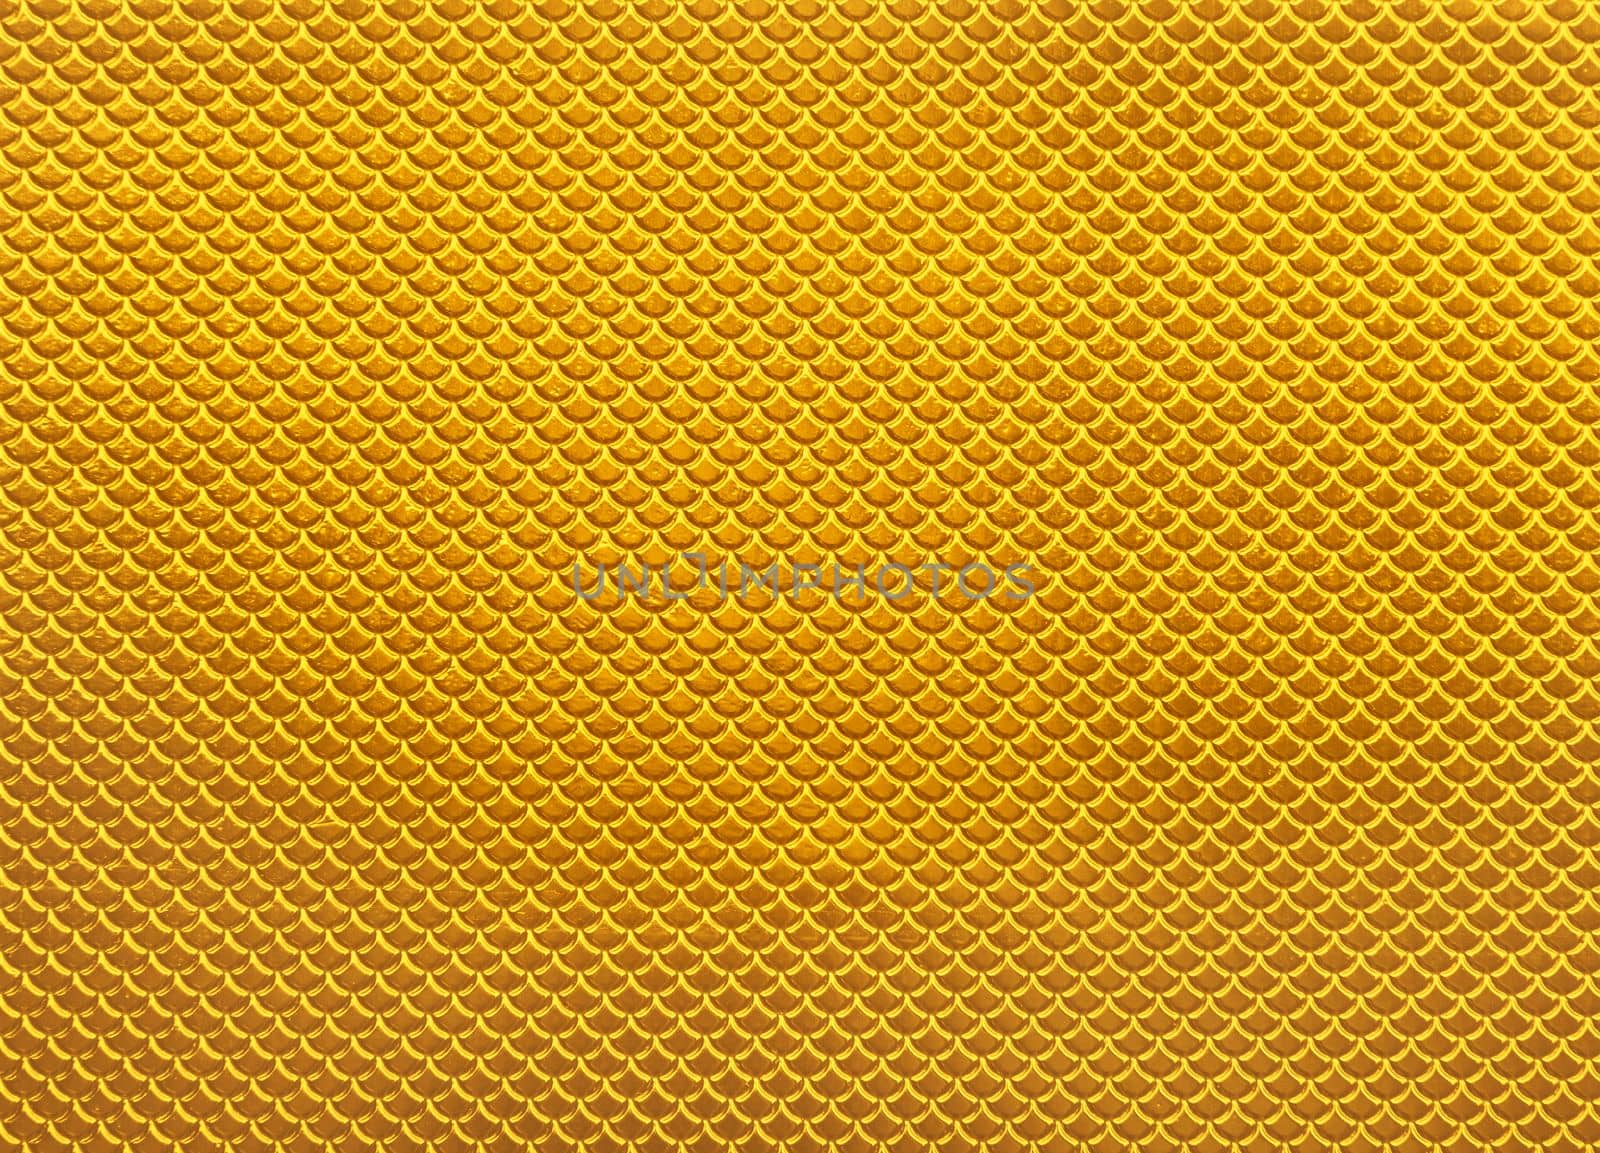 Abstract background of glossy shiny metallic vivid golden yellow scale shape pattern